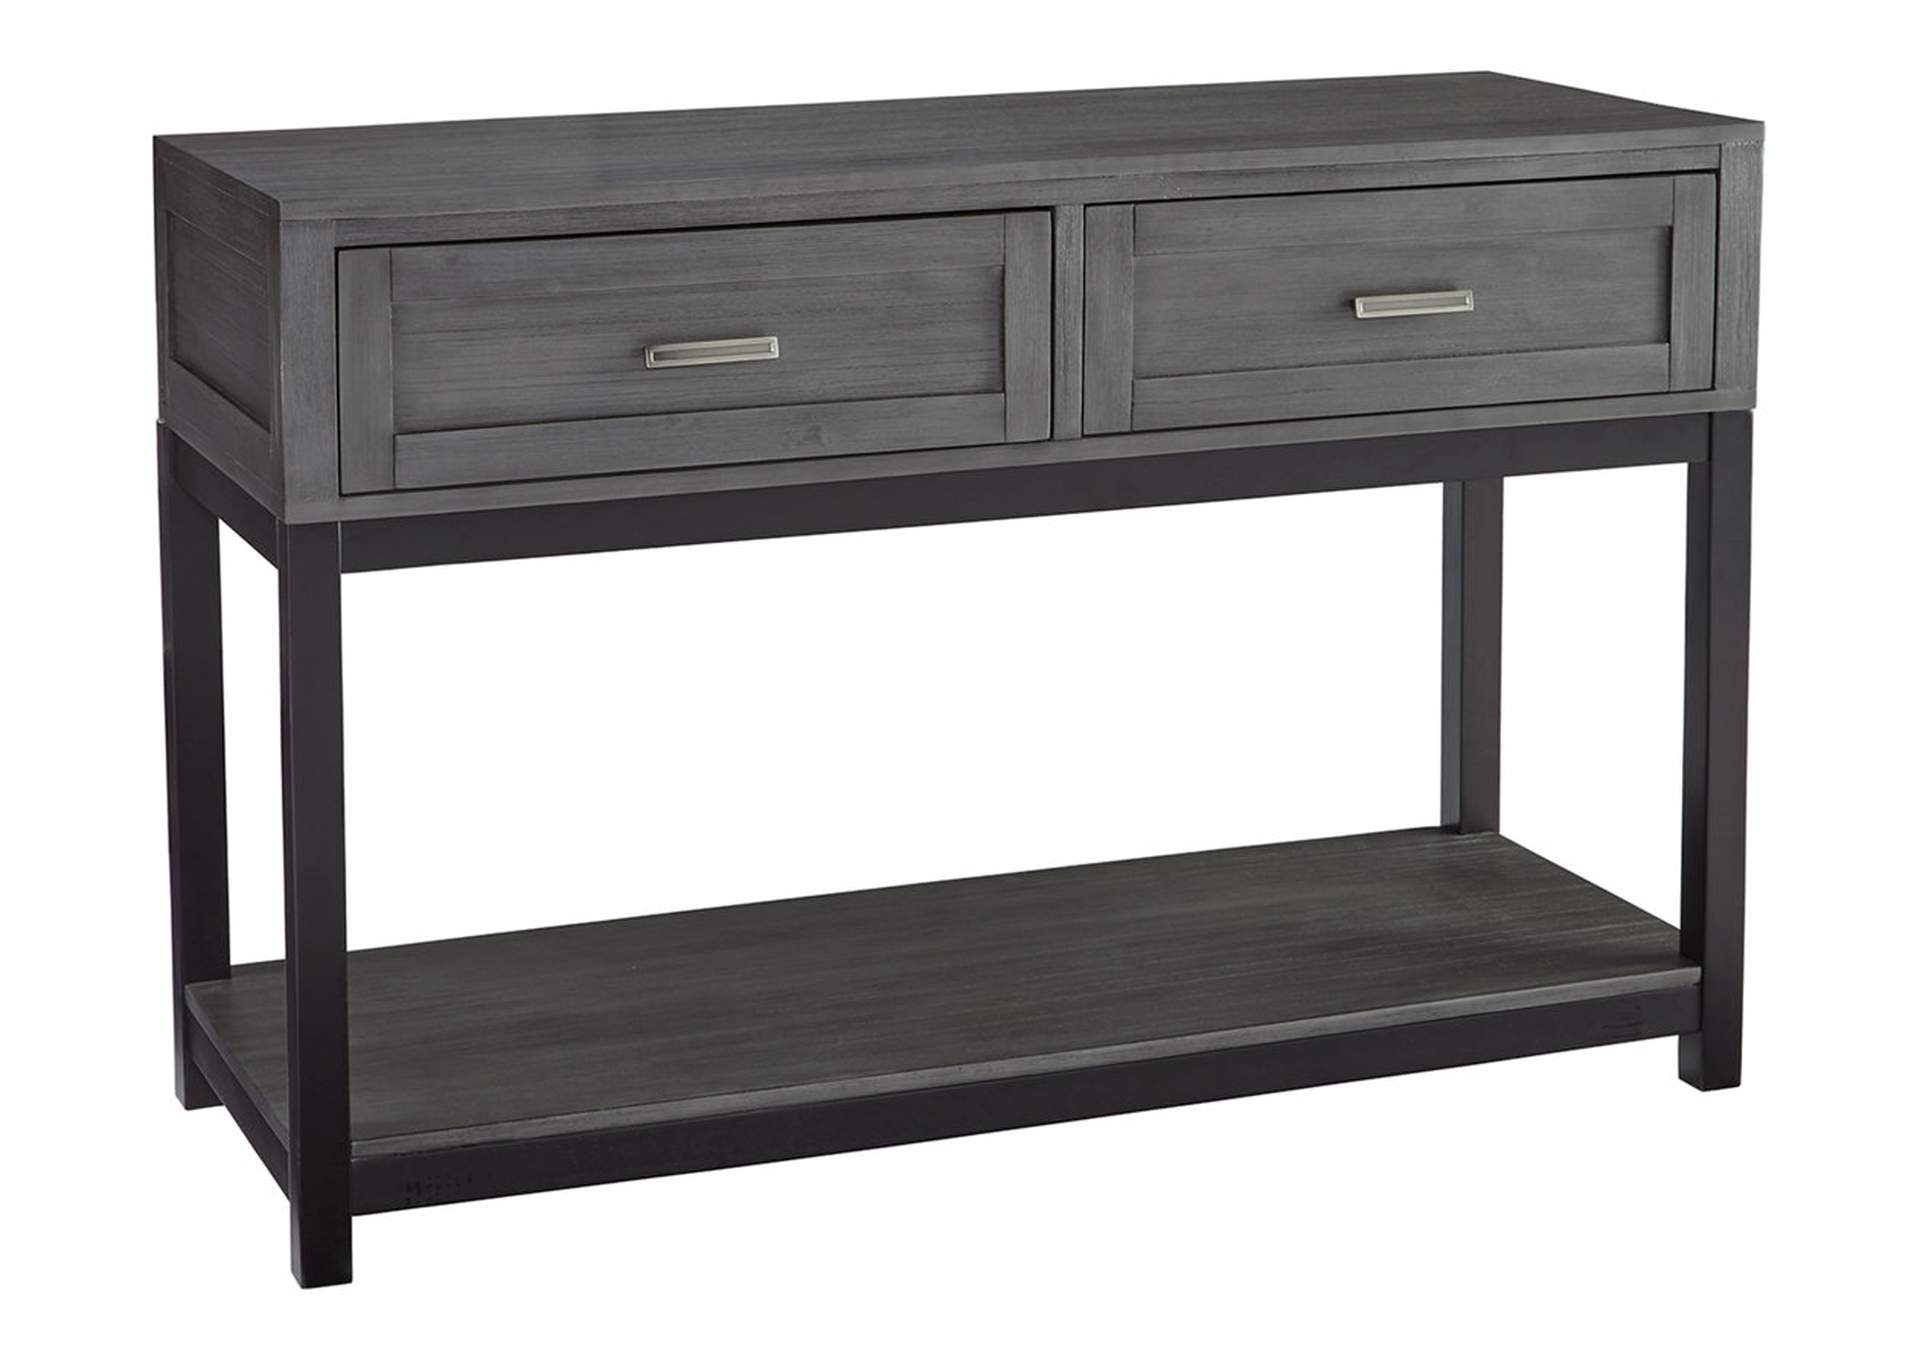 Black Gray Brown Beige Caitbrook Sofa, Sofa Console Table With Drawers